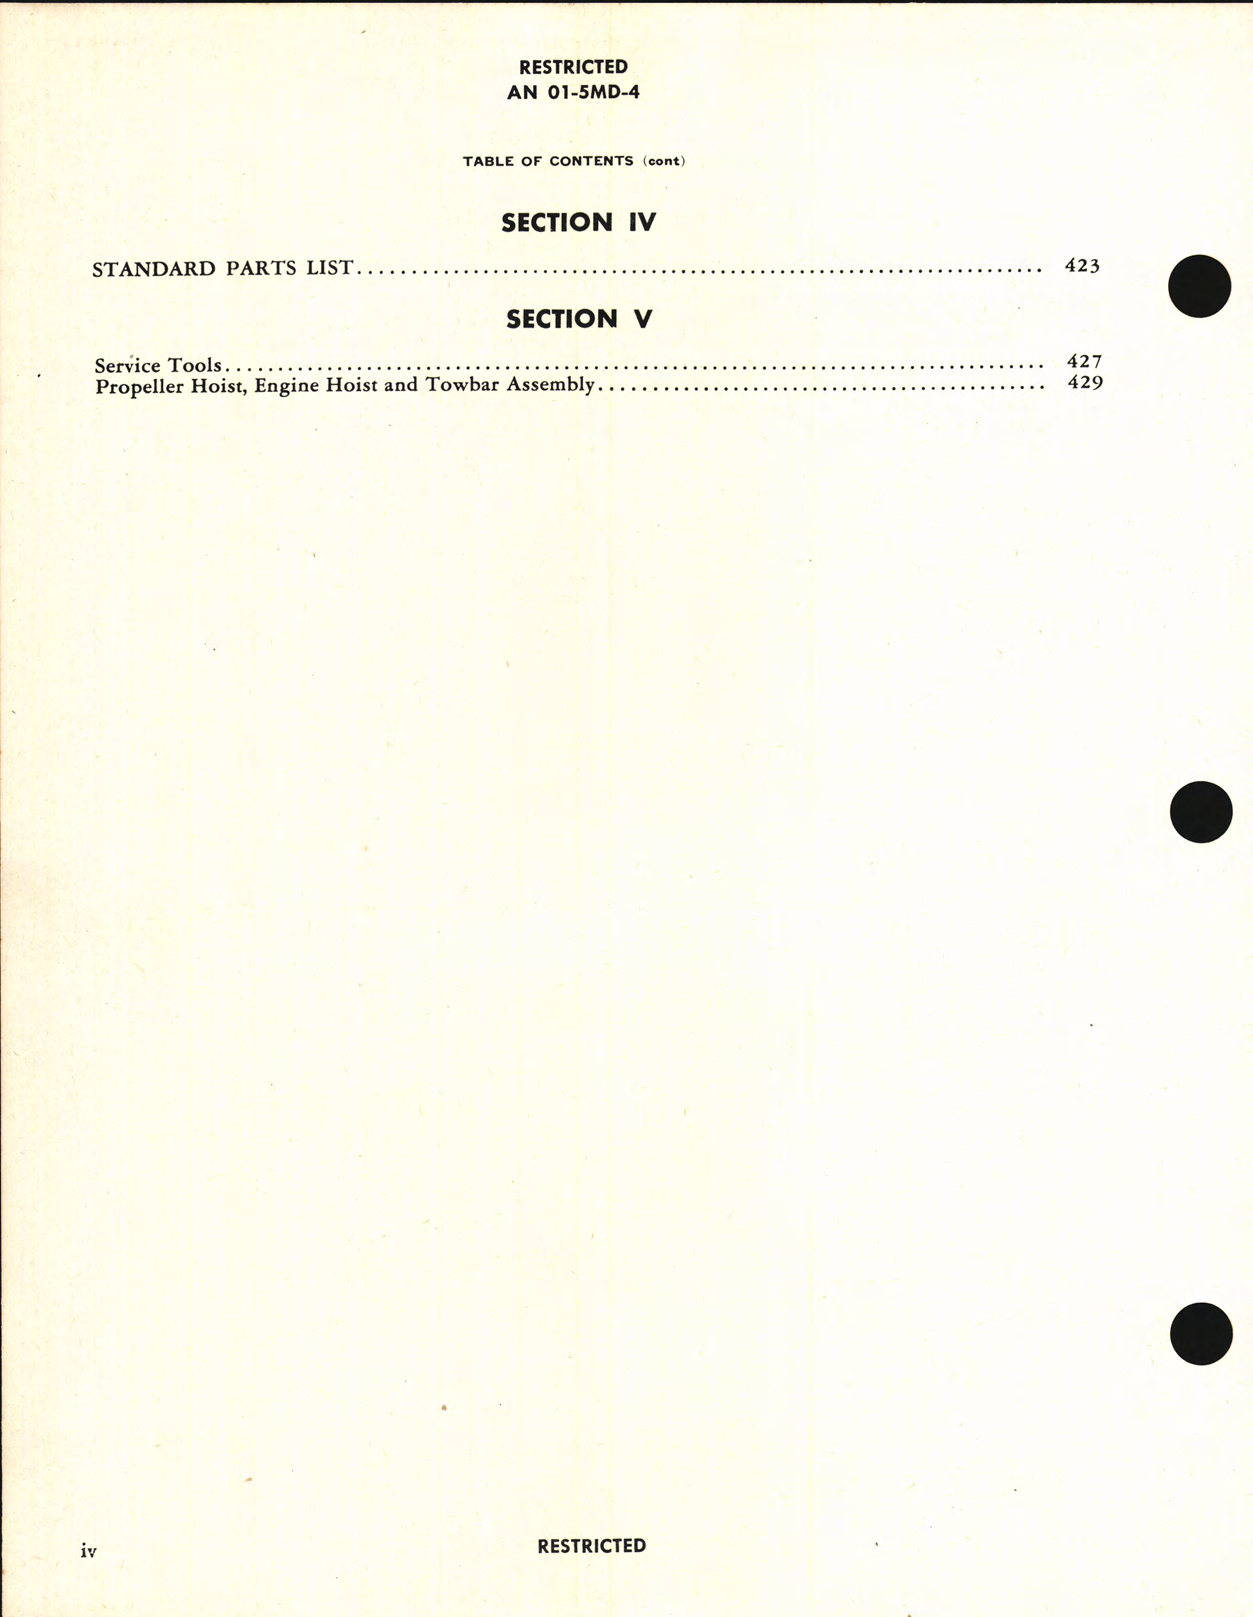 Sample page 6 from AirCorps Library document: Parts Catalog for Model OA-10A Airplanes